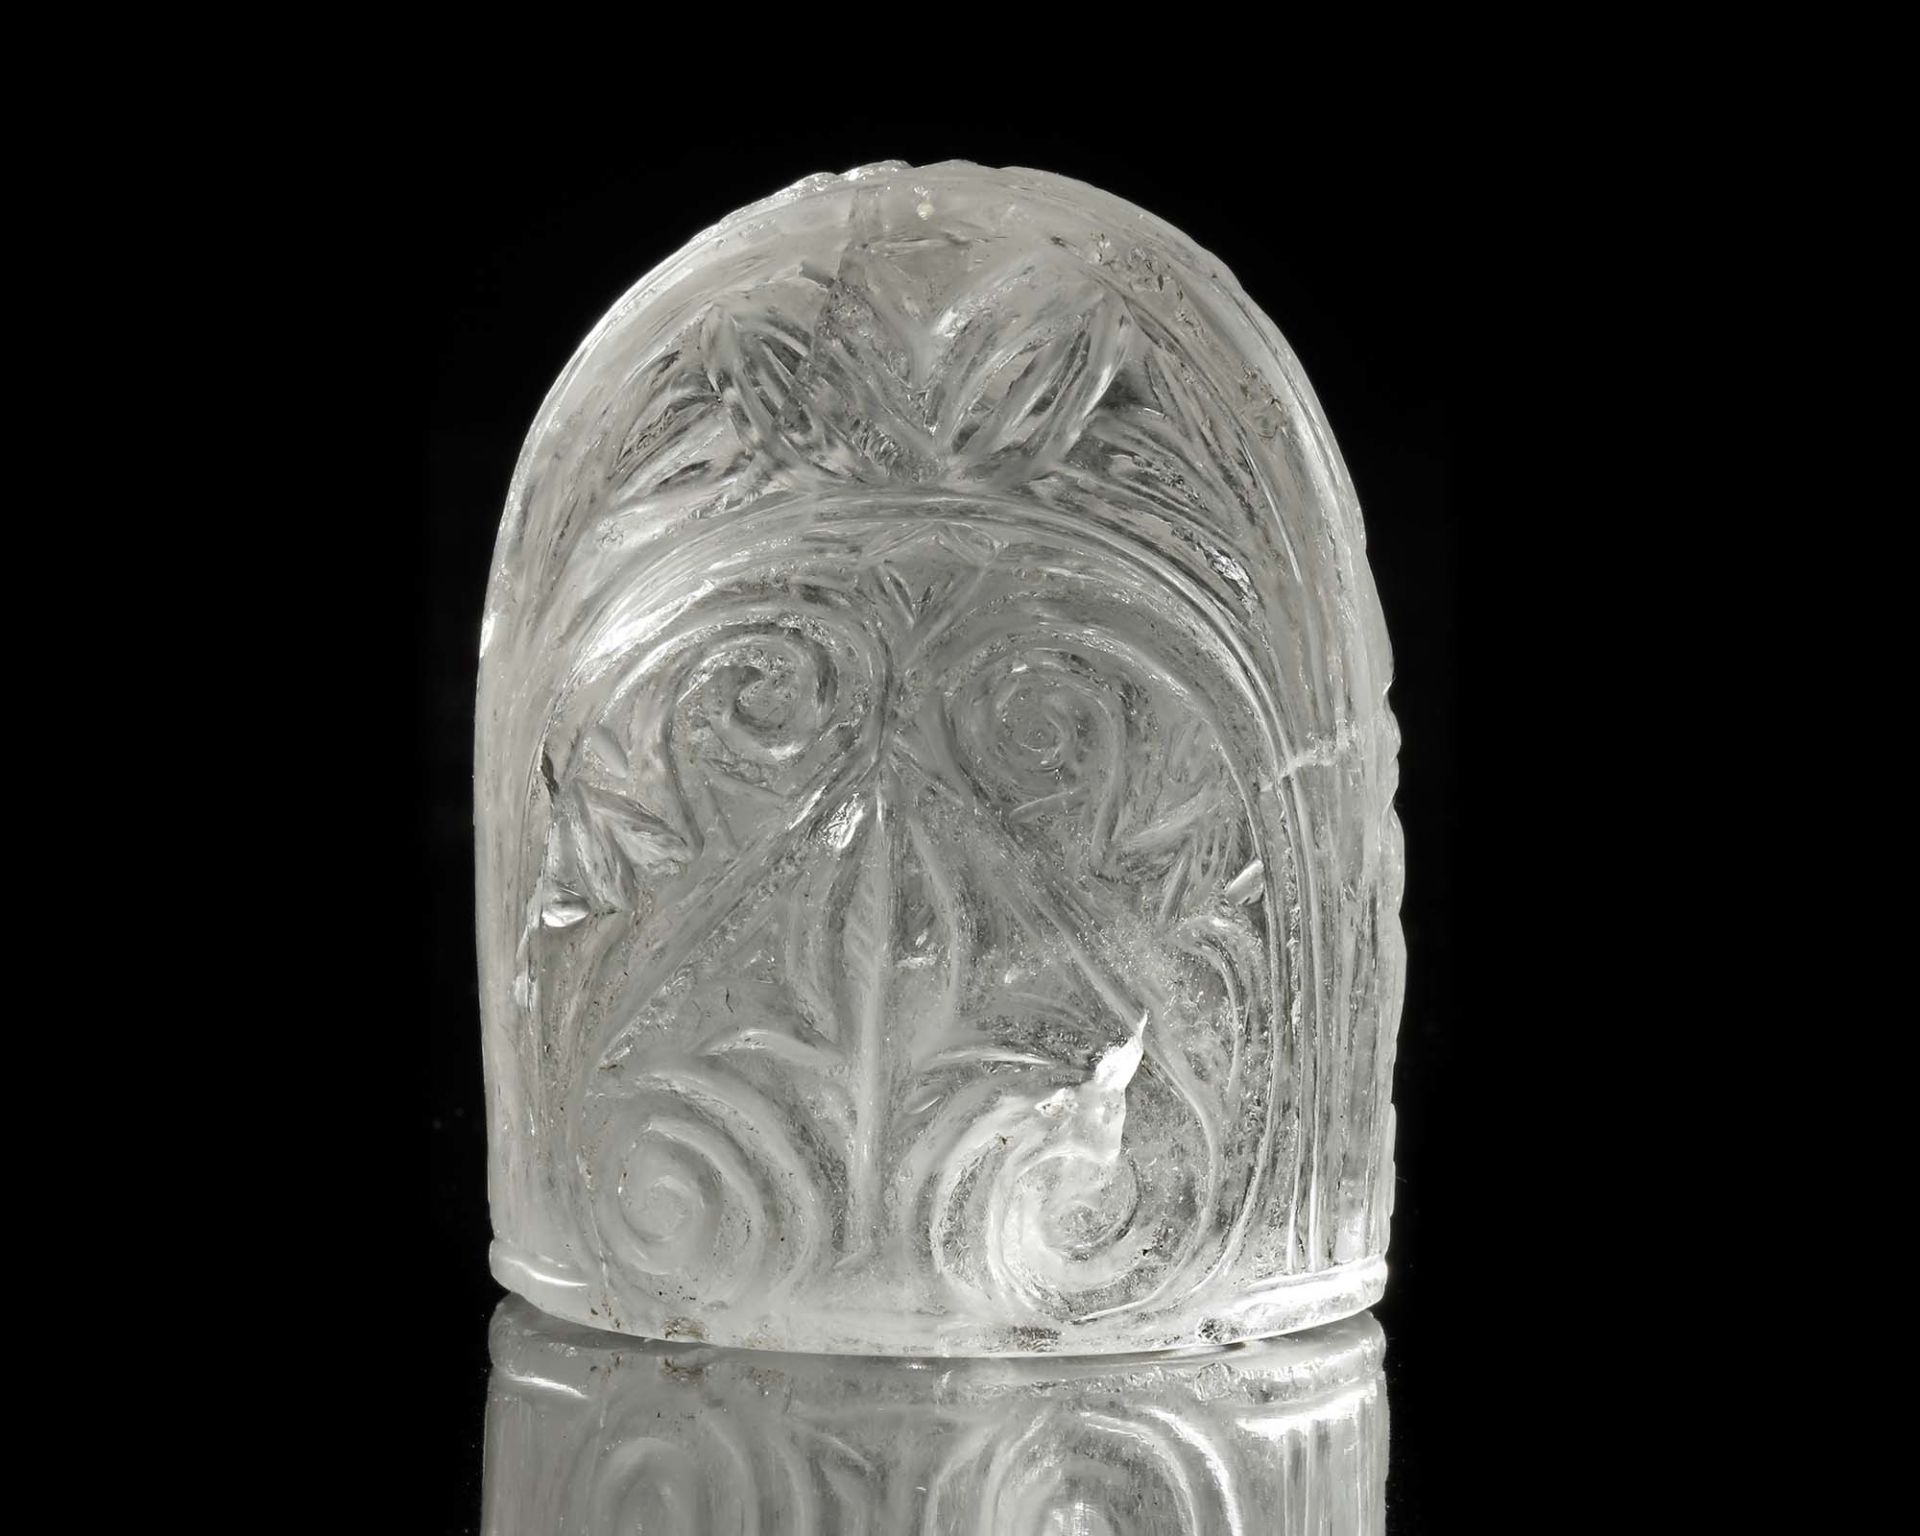 A KING (SHAH) ROCK CRYSTAL CHESS PIECE, IRAQ OR KHORASAN, LATE 9TH-EARLY 10TH CENTURY - Image 10 of 14